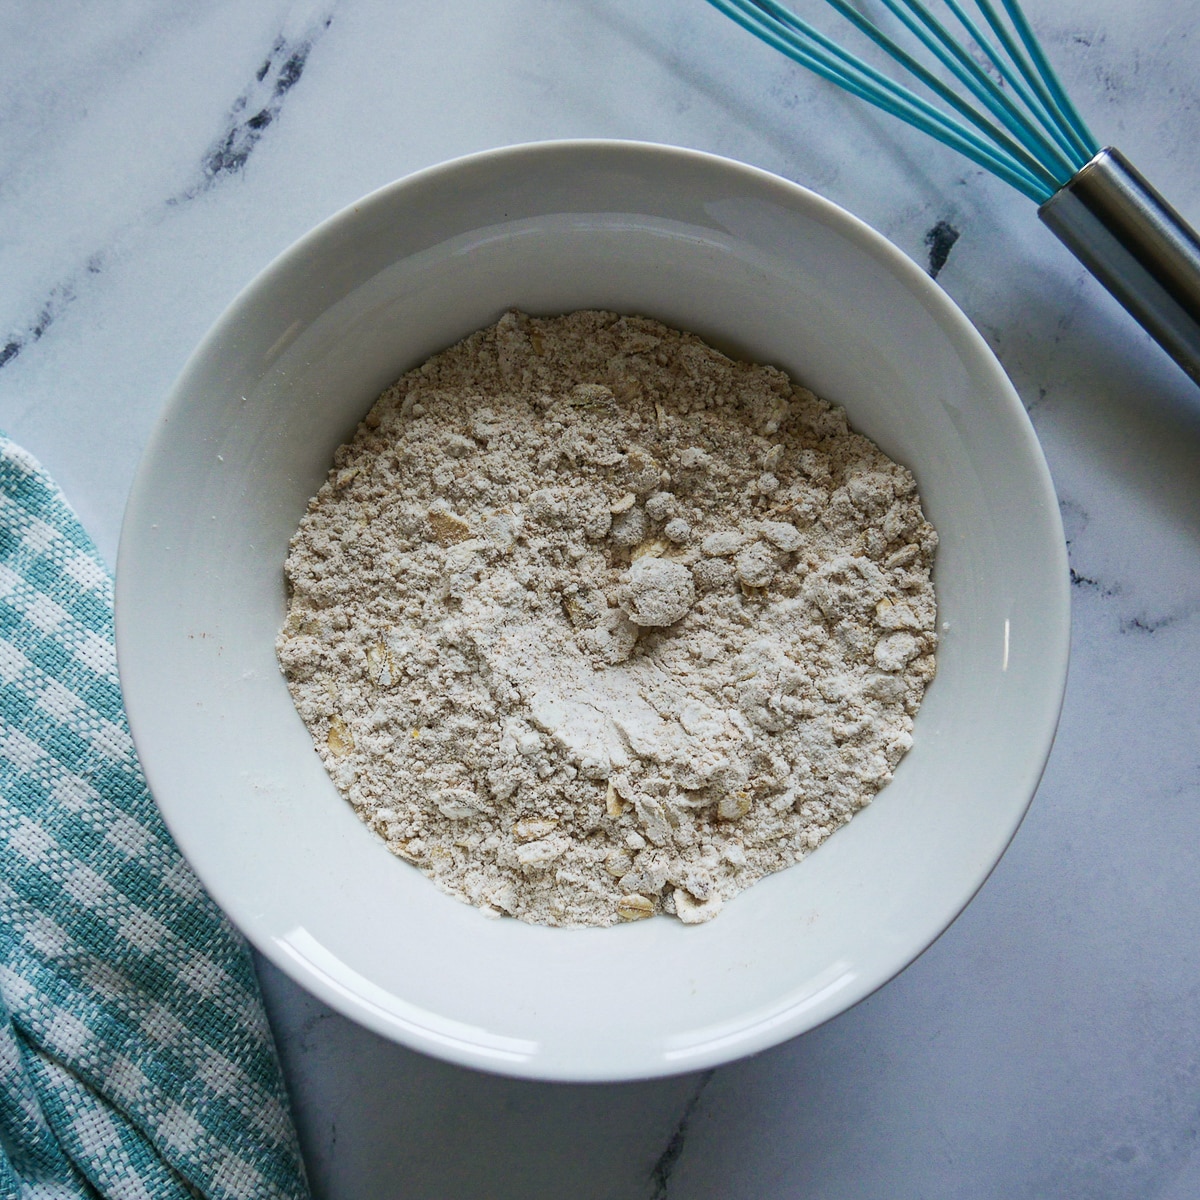 Flour, oats, brown sugar, baking powder, cinnamon, and salt combined in a small white bowl.